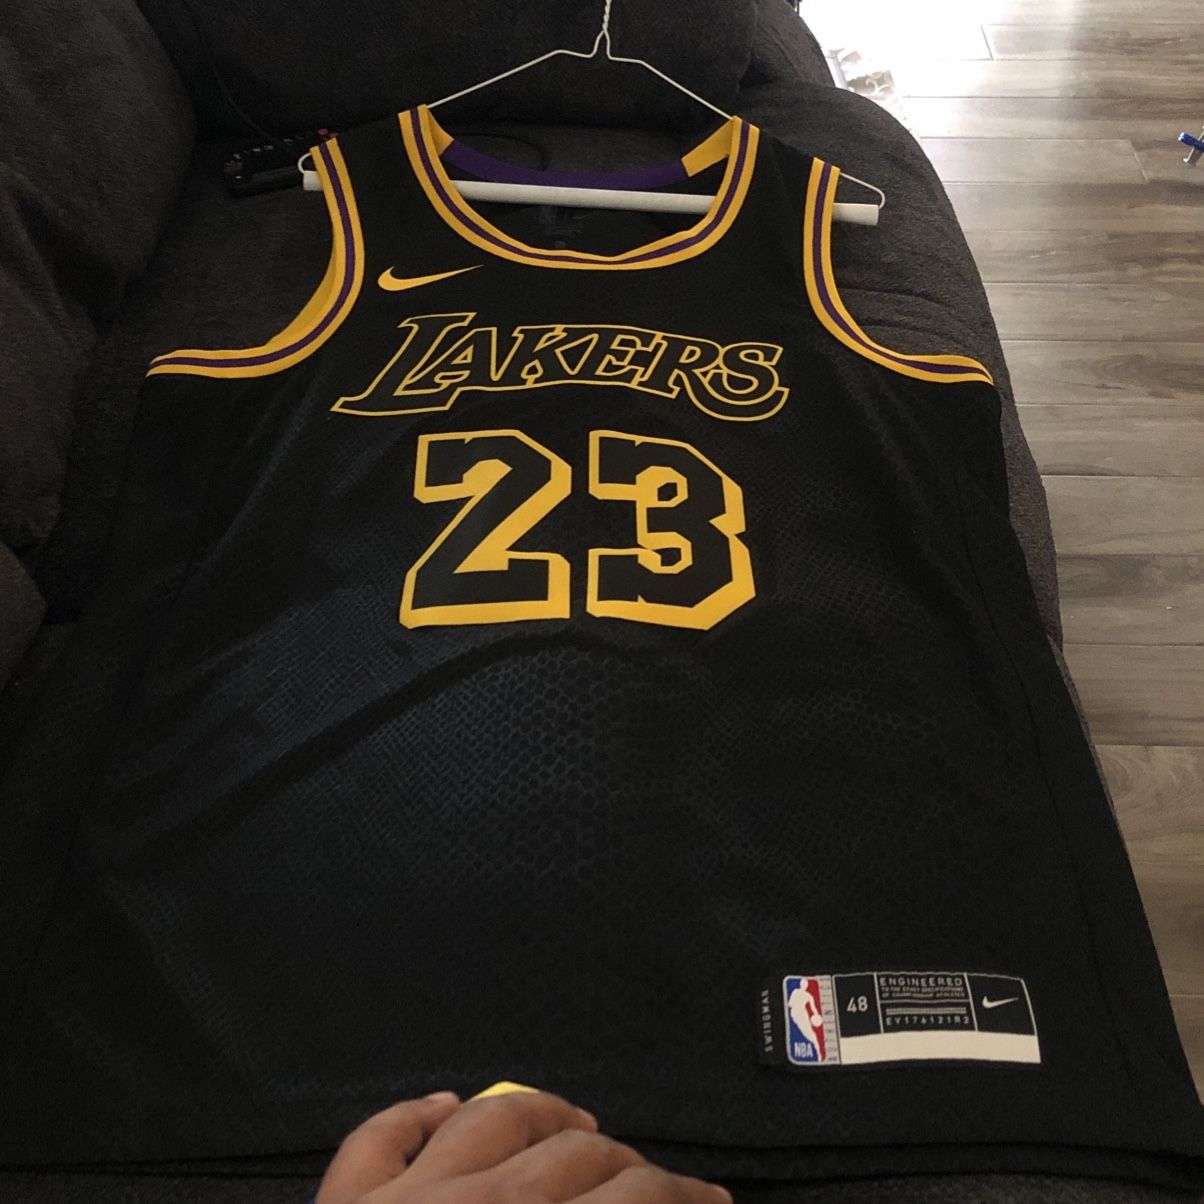 Lakers LeBron James Jersey No. 6 for Sale in Cleveland, OH - OfferUp